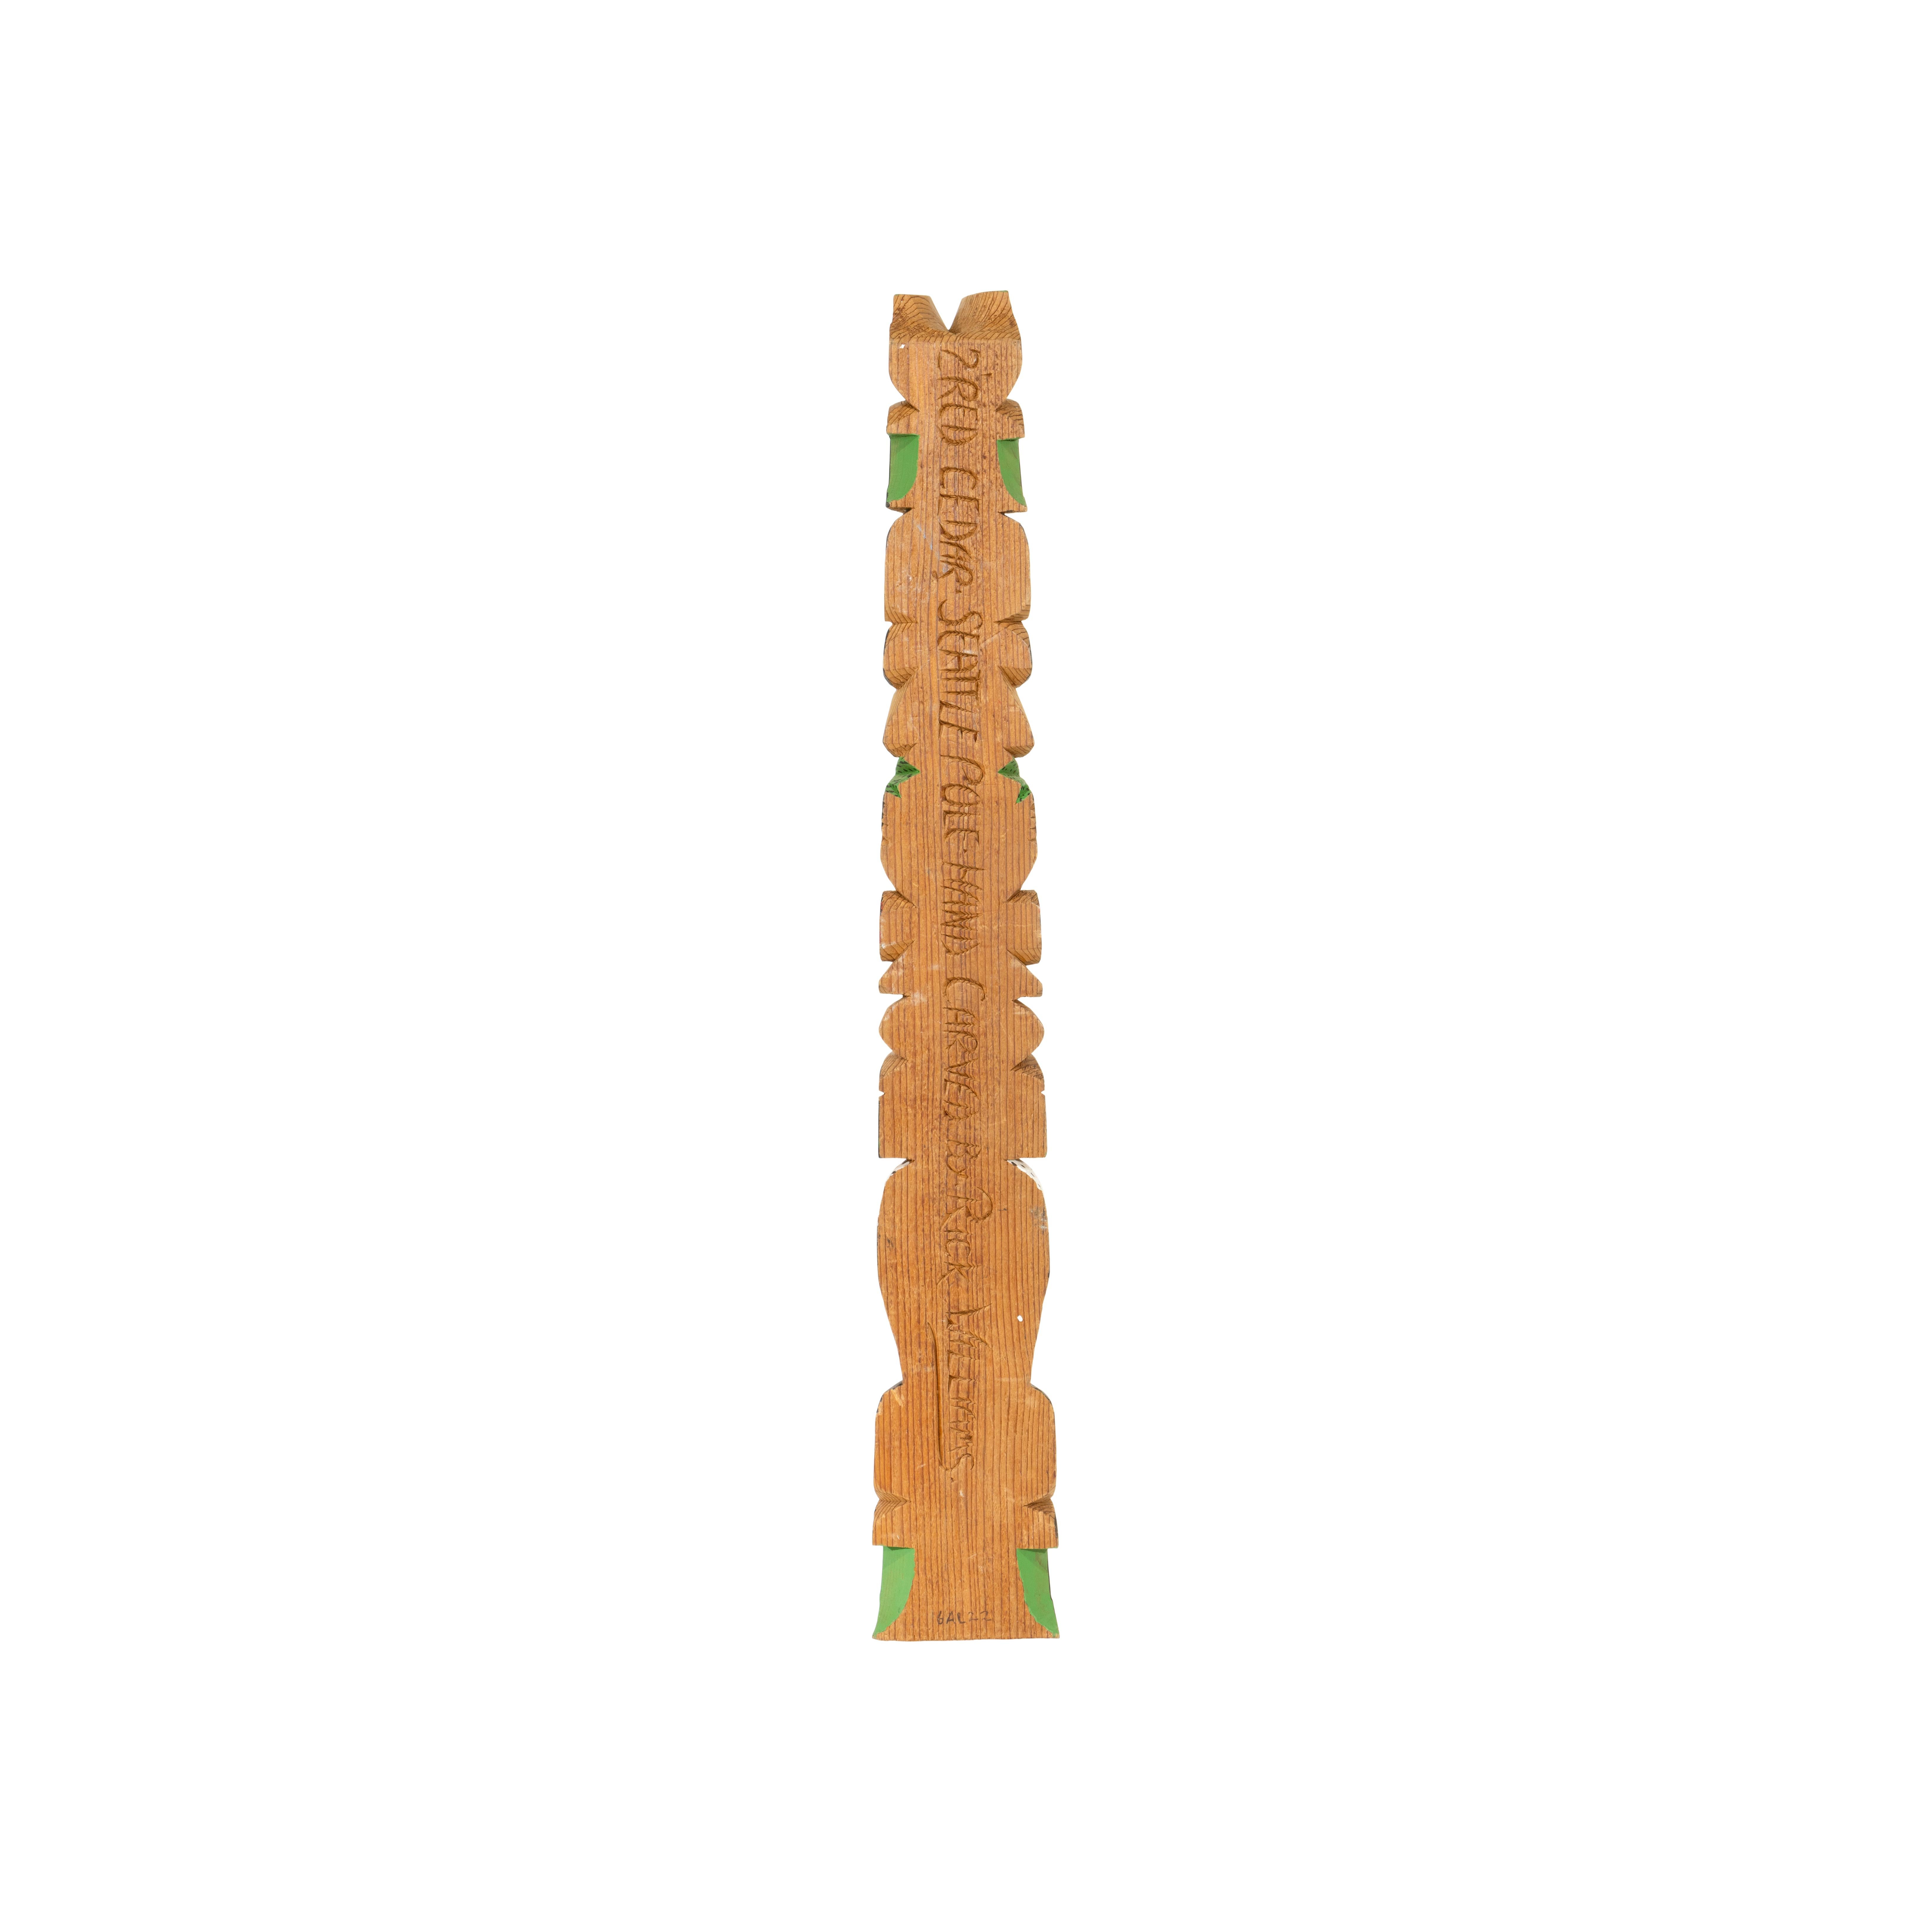 Carved Native Nootka Totem by Rick Williams, 2 Foot For Sale